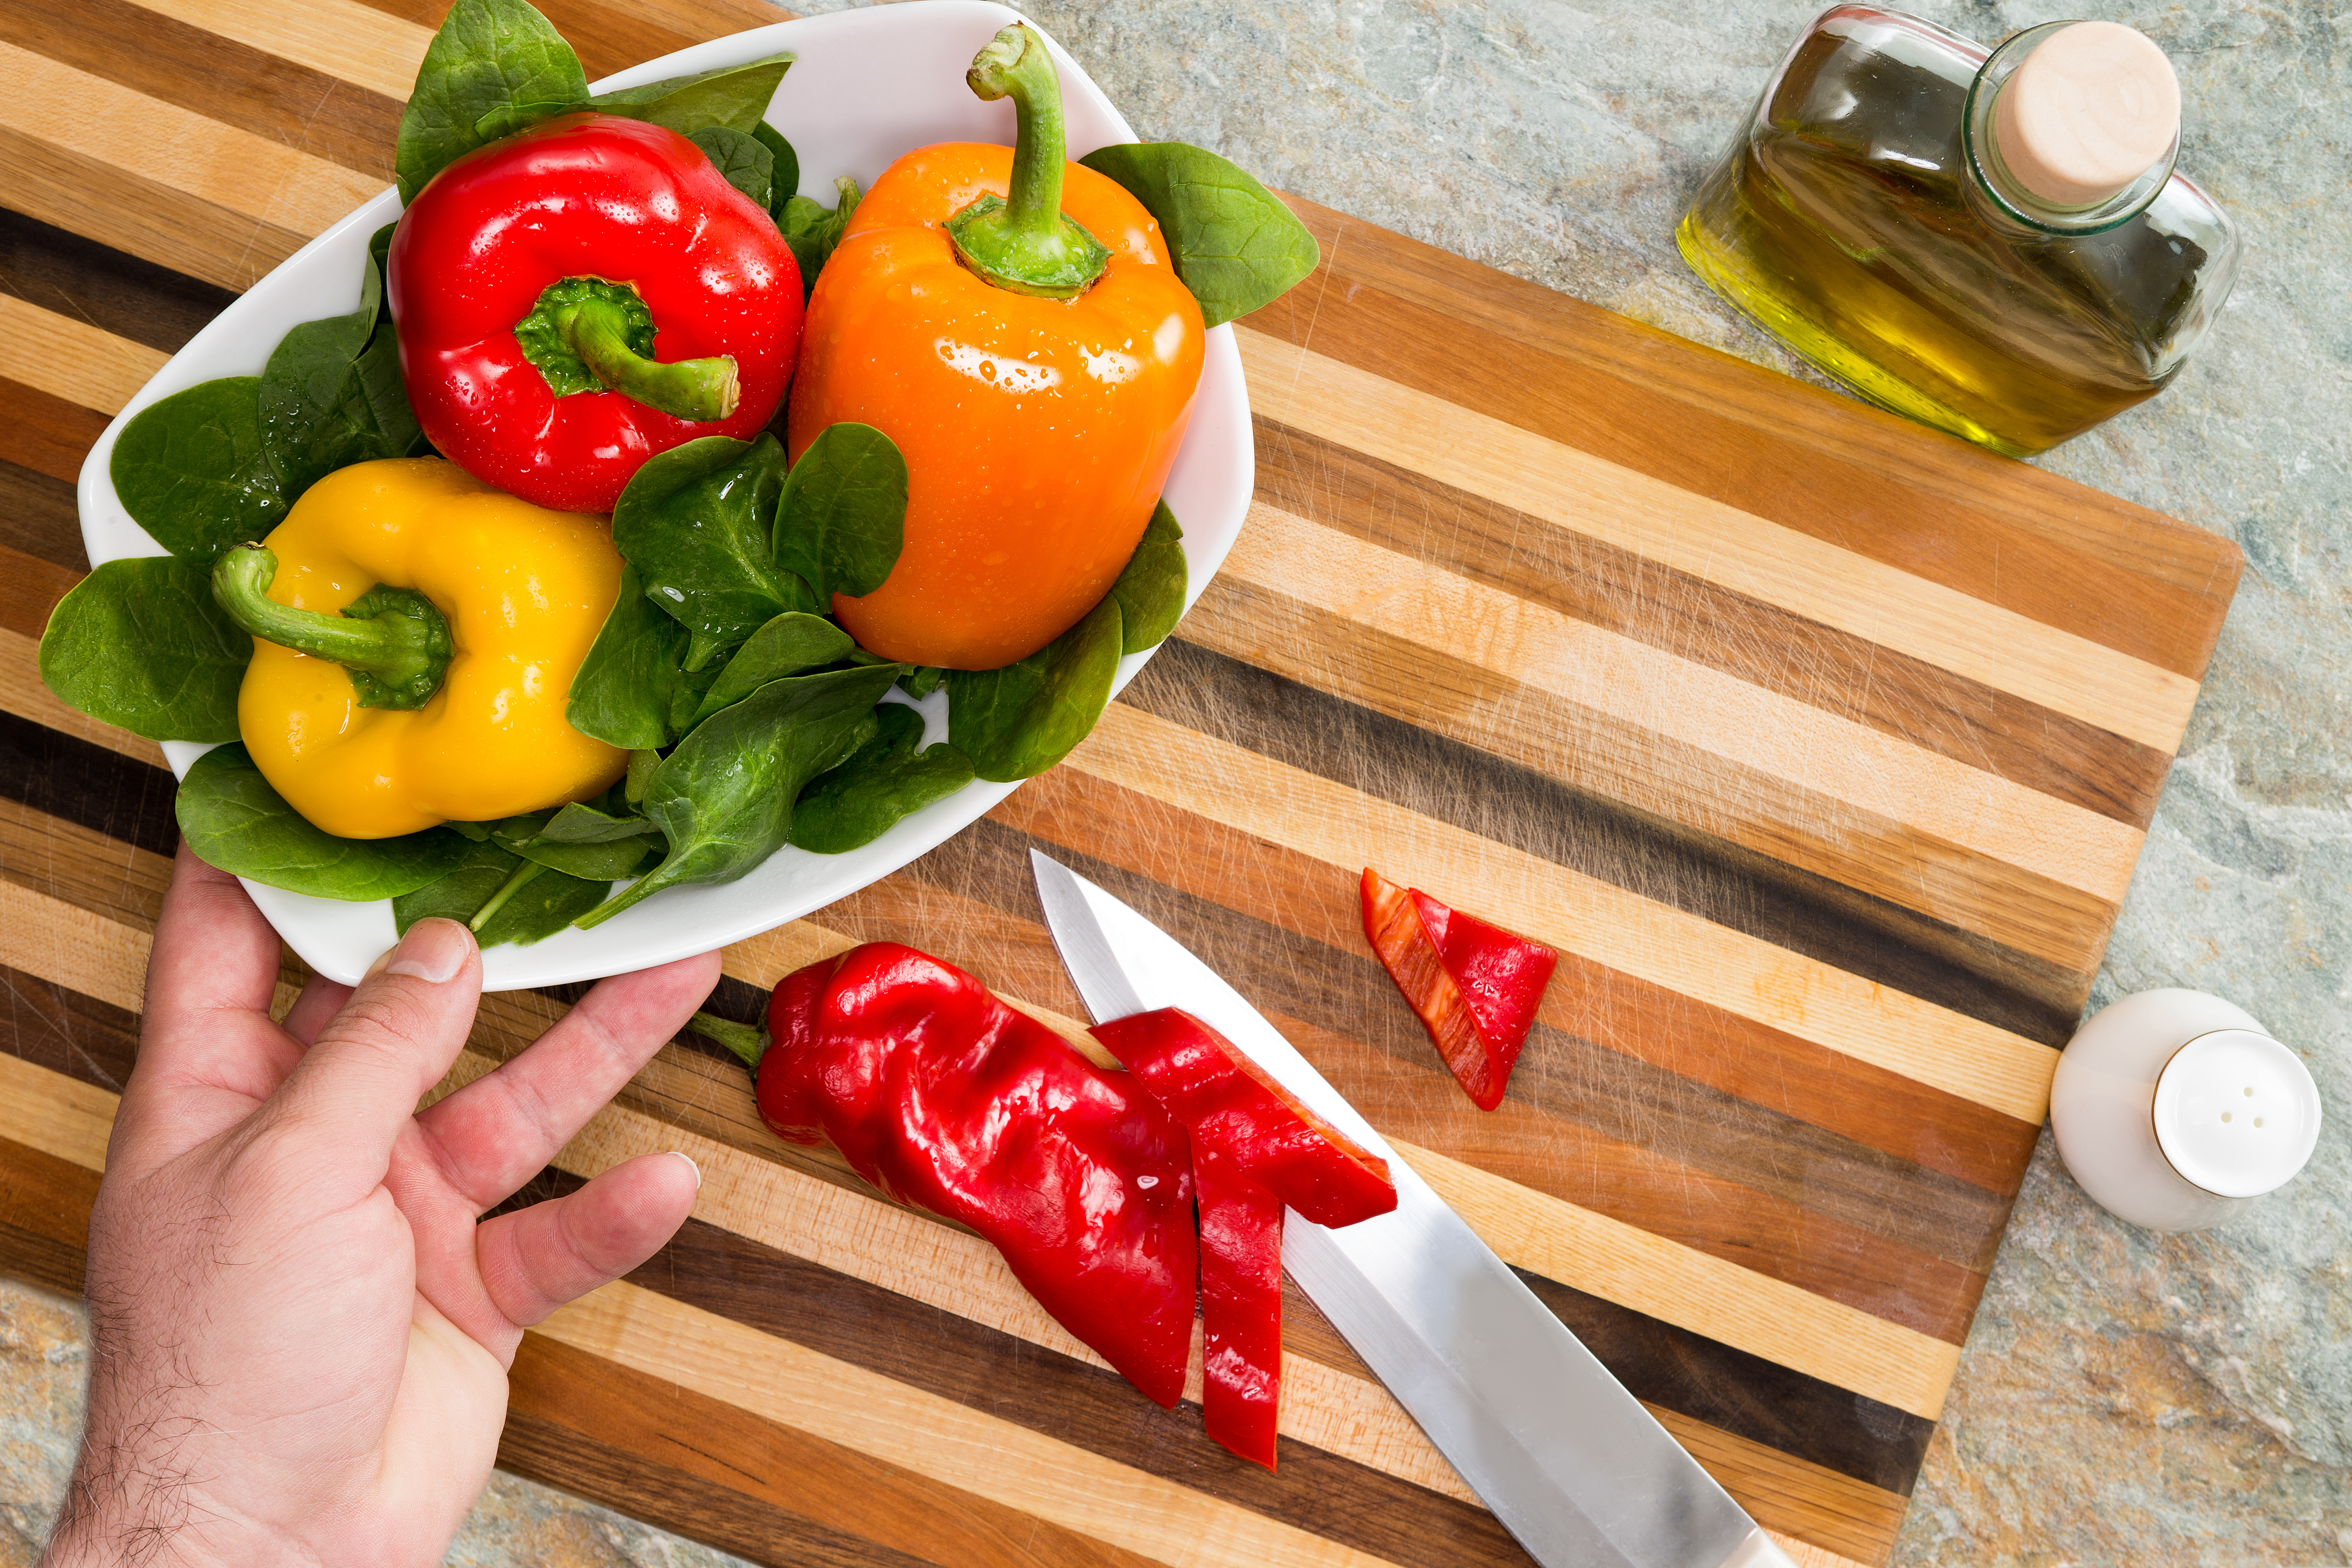 Man preparing a healthy fresh salad reaching for a bowl of colourful sweet bell peppers in red, yellow and orange with green baby spinach leaves as he chops the ingredients on a striped wooden board